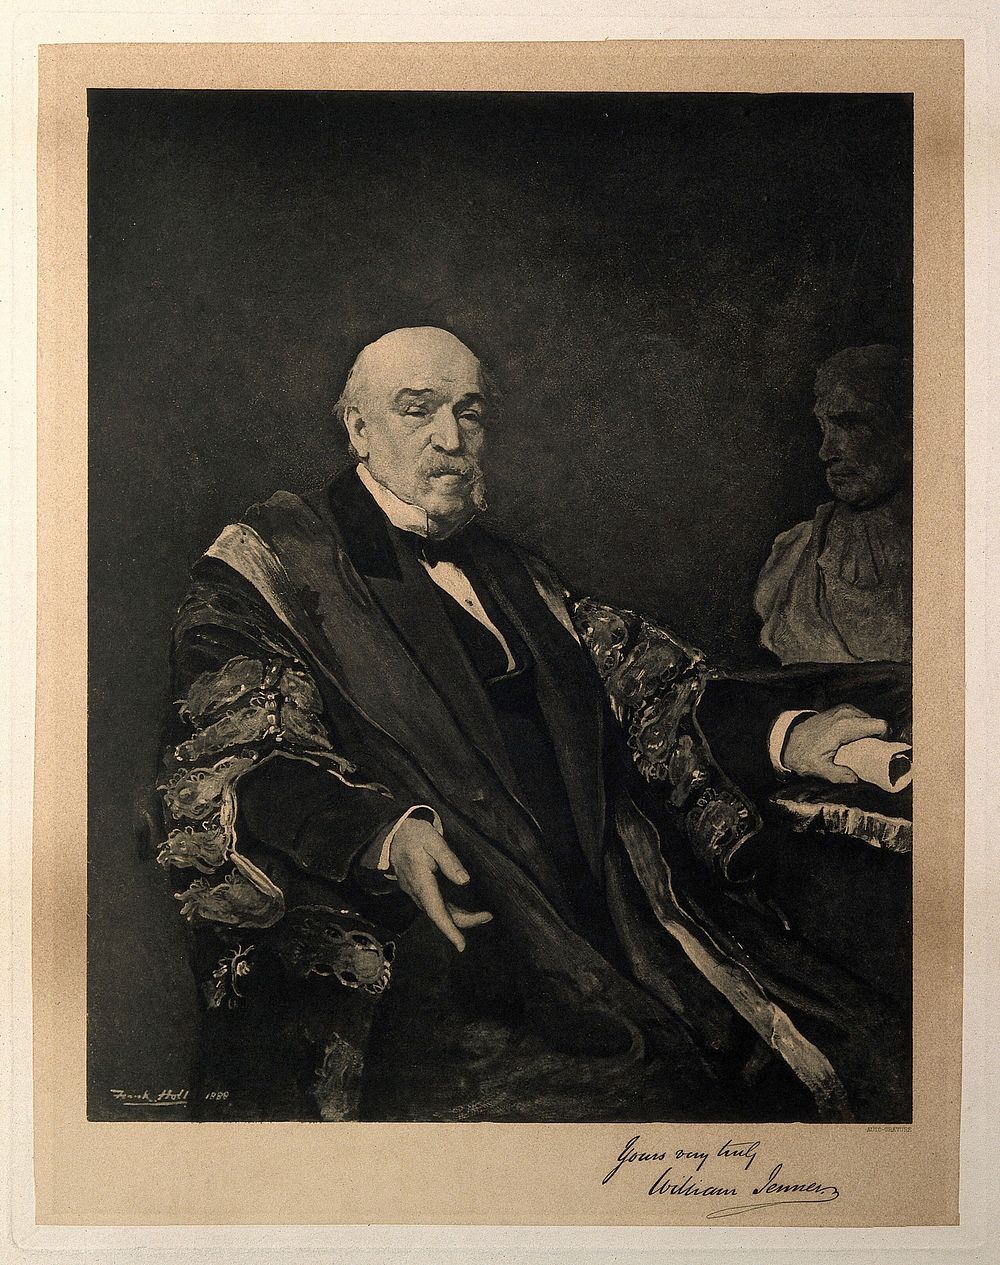 Sir William Jenner. Photogravure after F. Holl, 1888.